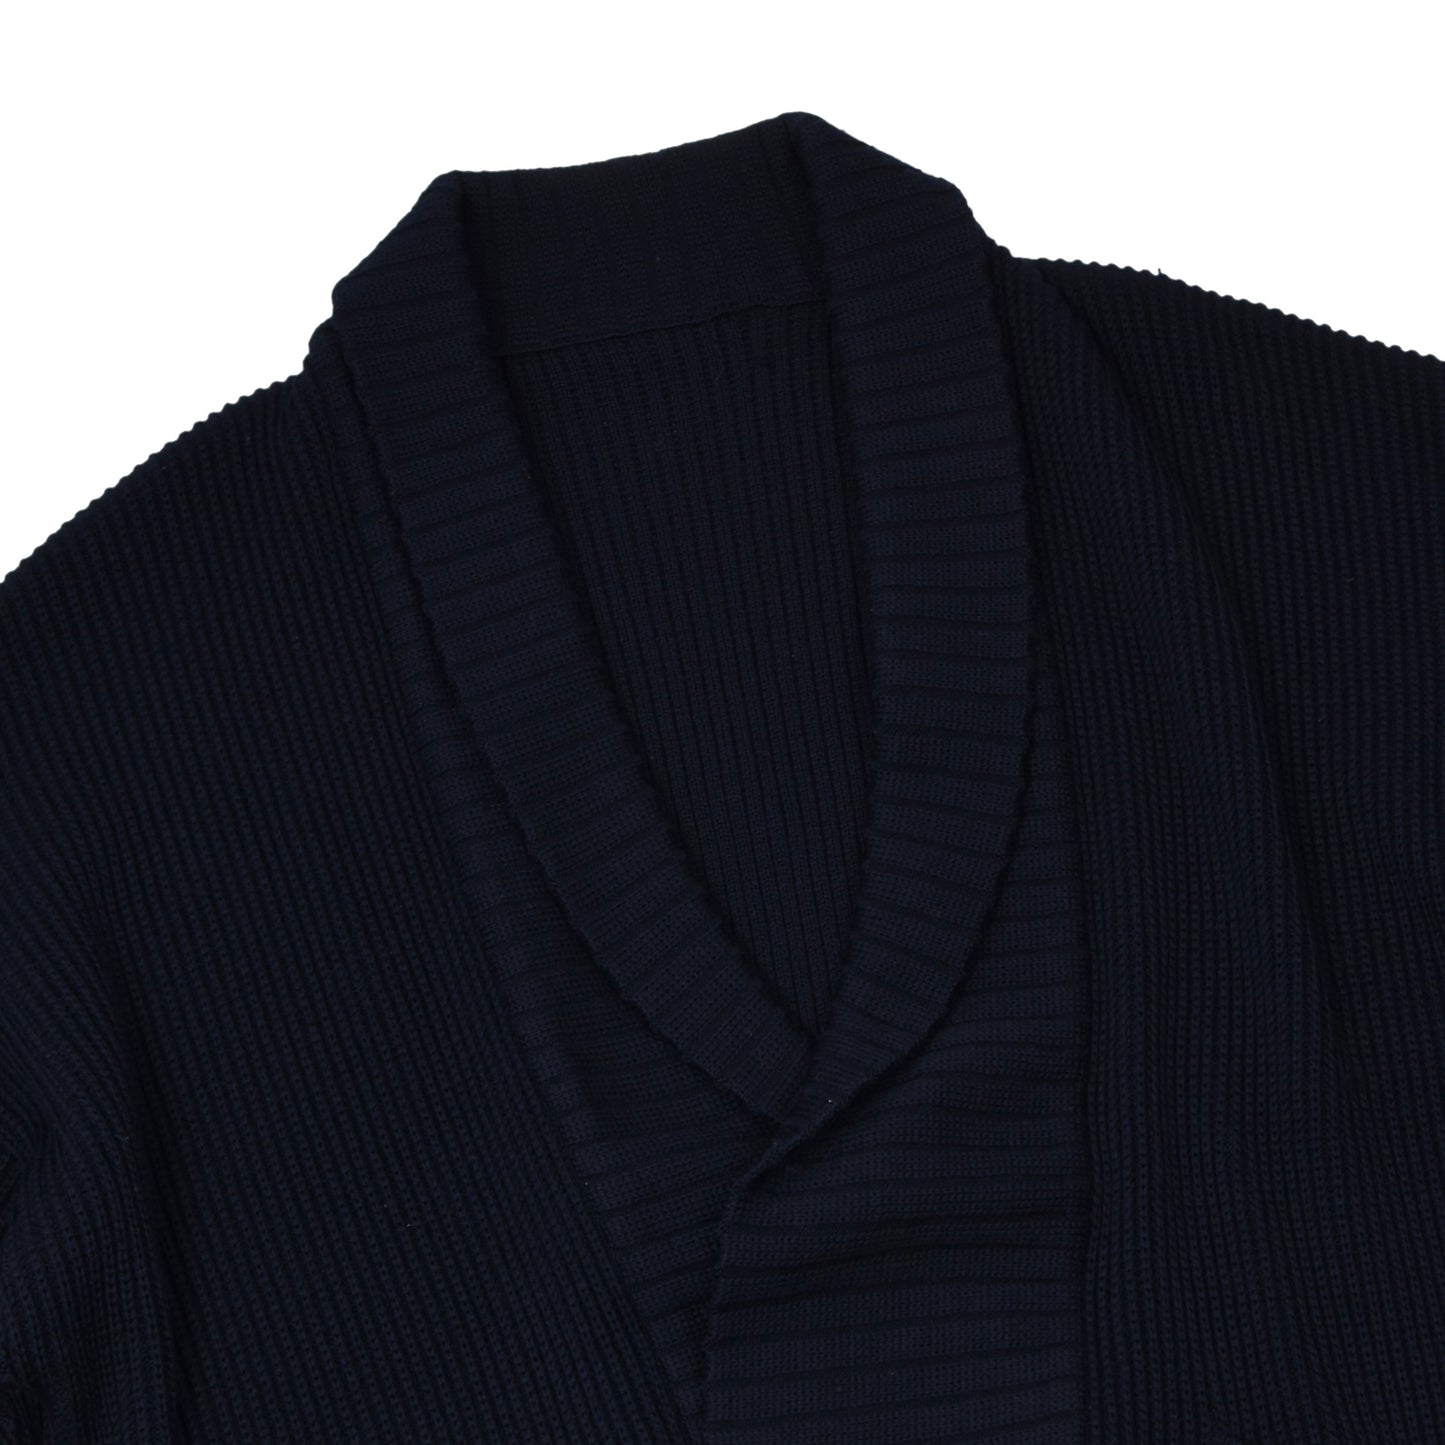 Maerz Wool Double-Breasted Cardigan Sweater Size 56 XL - Navy Blue